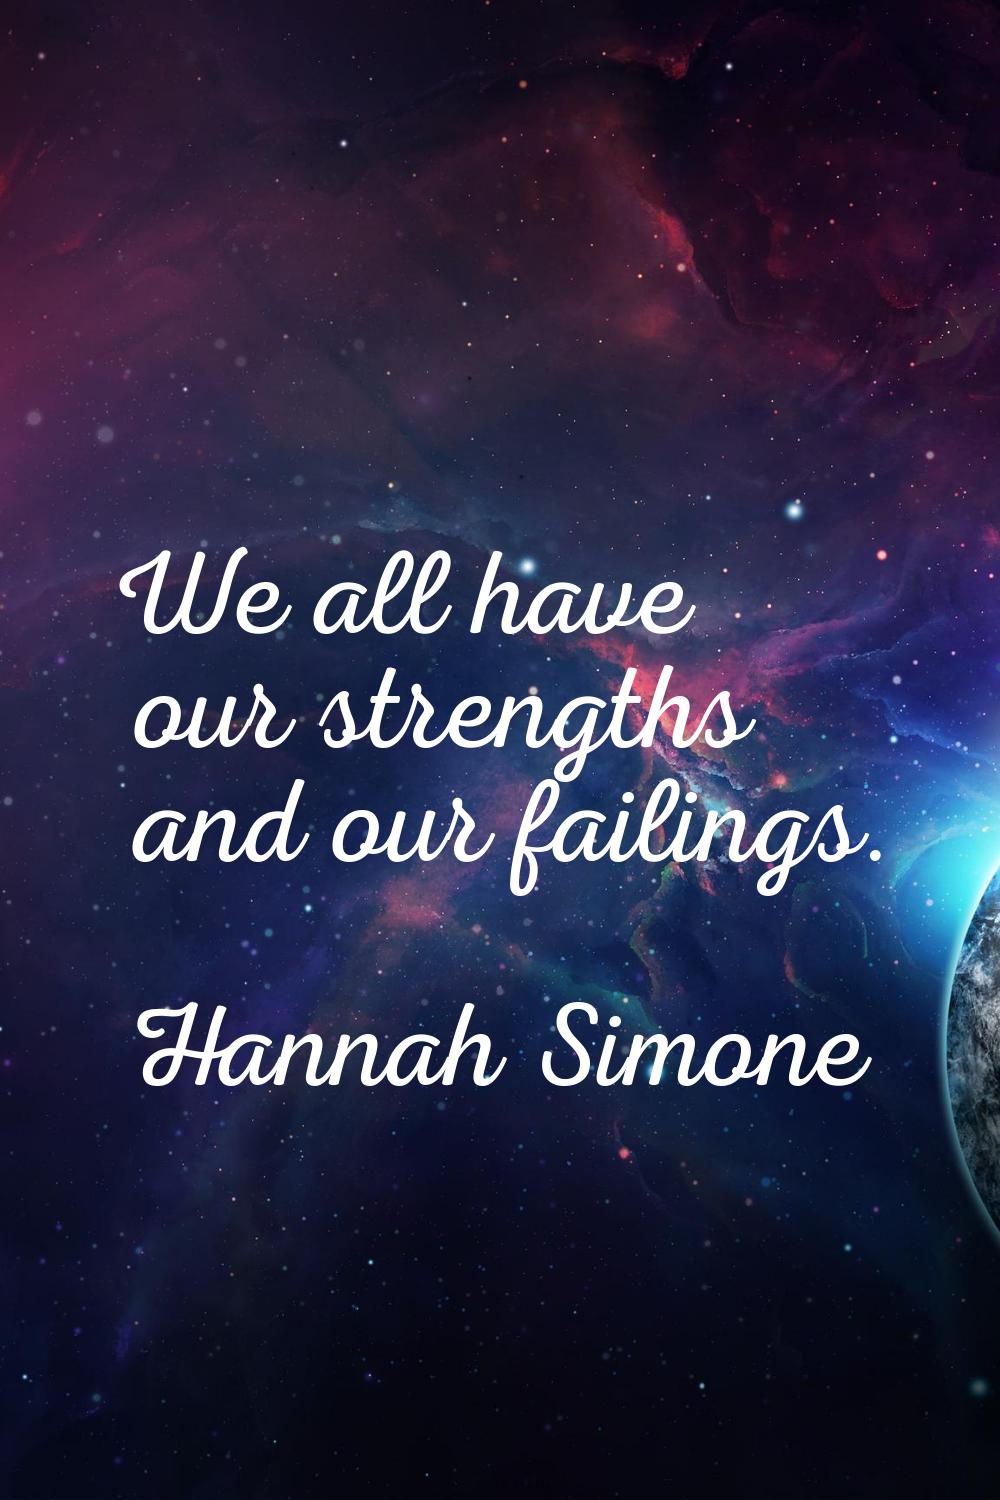 We all have our strengths and our failings.